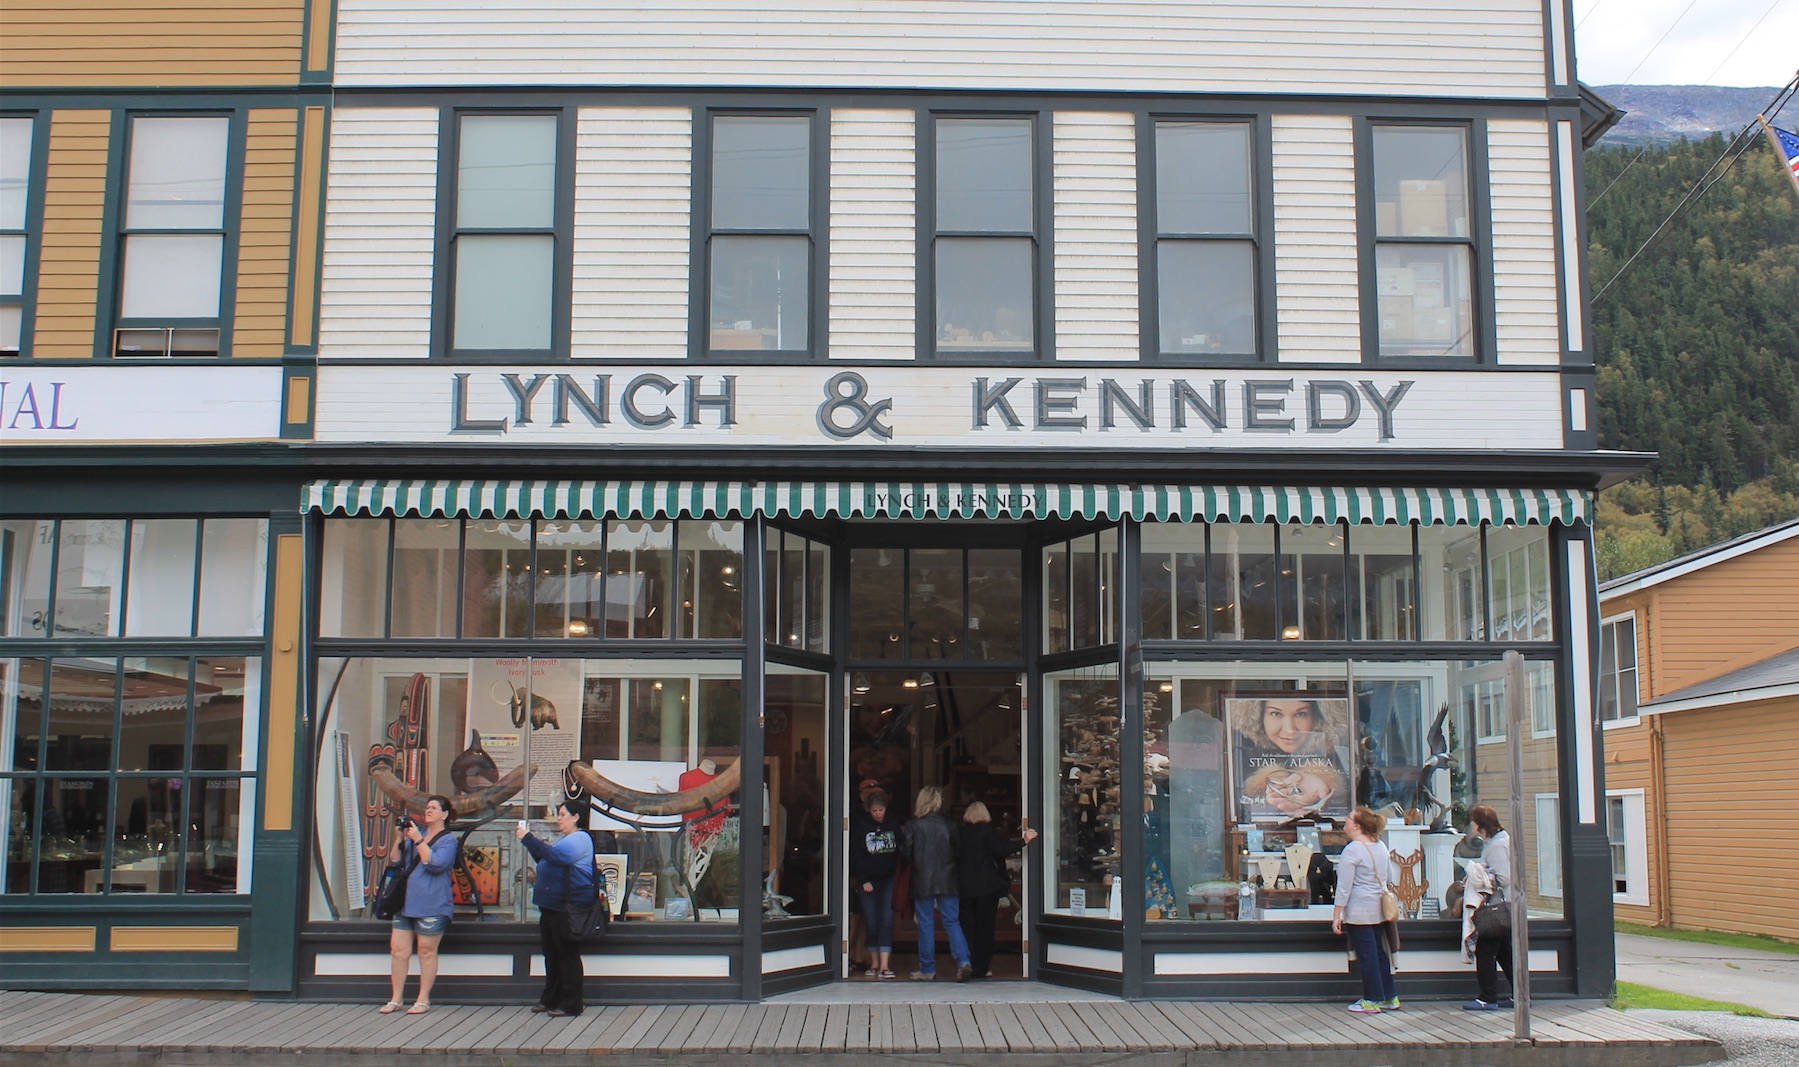 Lynch & Kennedy Dry Goods is owned by Skagway shopkeeper Rosemary Libert, who was found not guilty Friday of misrepresenting art as Alaska Native-made.